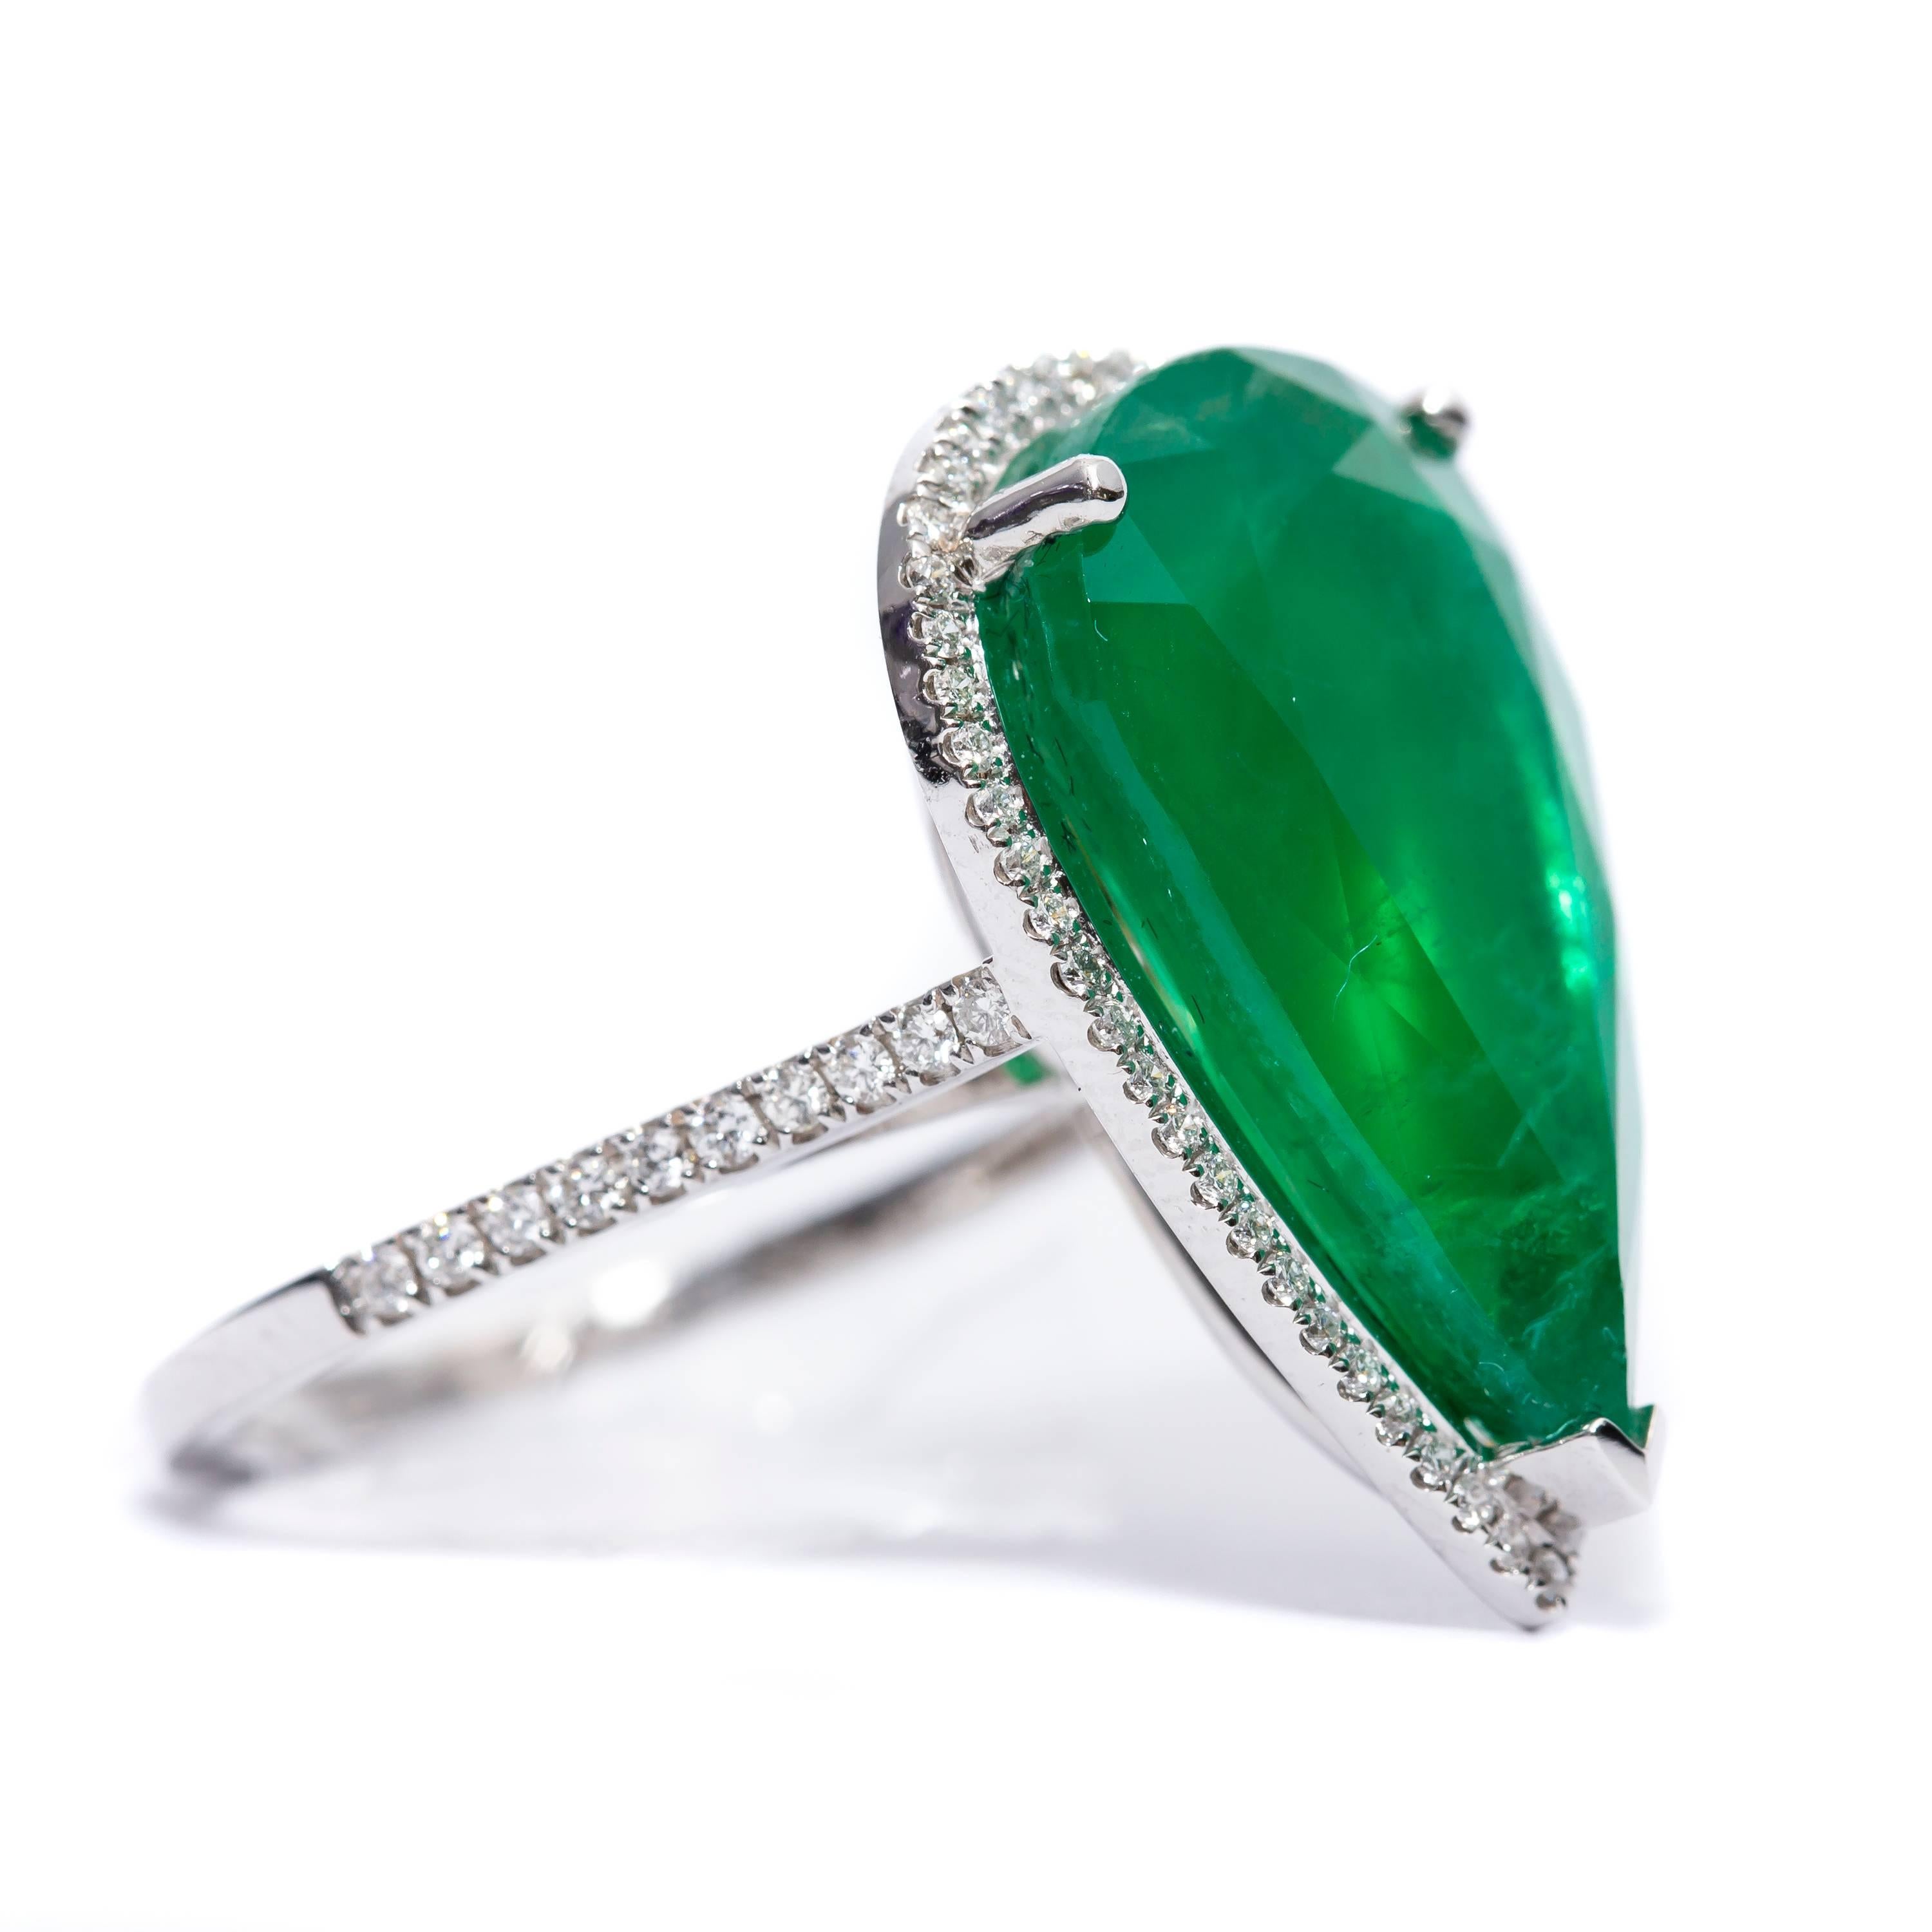 This extraordinary 9.78 Carat Pear Shaped Emerald Ring highlighted by a halo of 0.33 Carat dazzling Round Brilliant Diamonds for a stunning statement piece to add to any collection. Set in 18 Karat White Gold, British Hallmarked. UK size L, US size